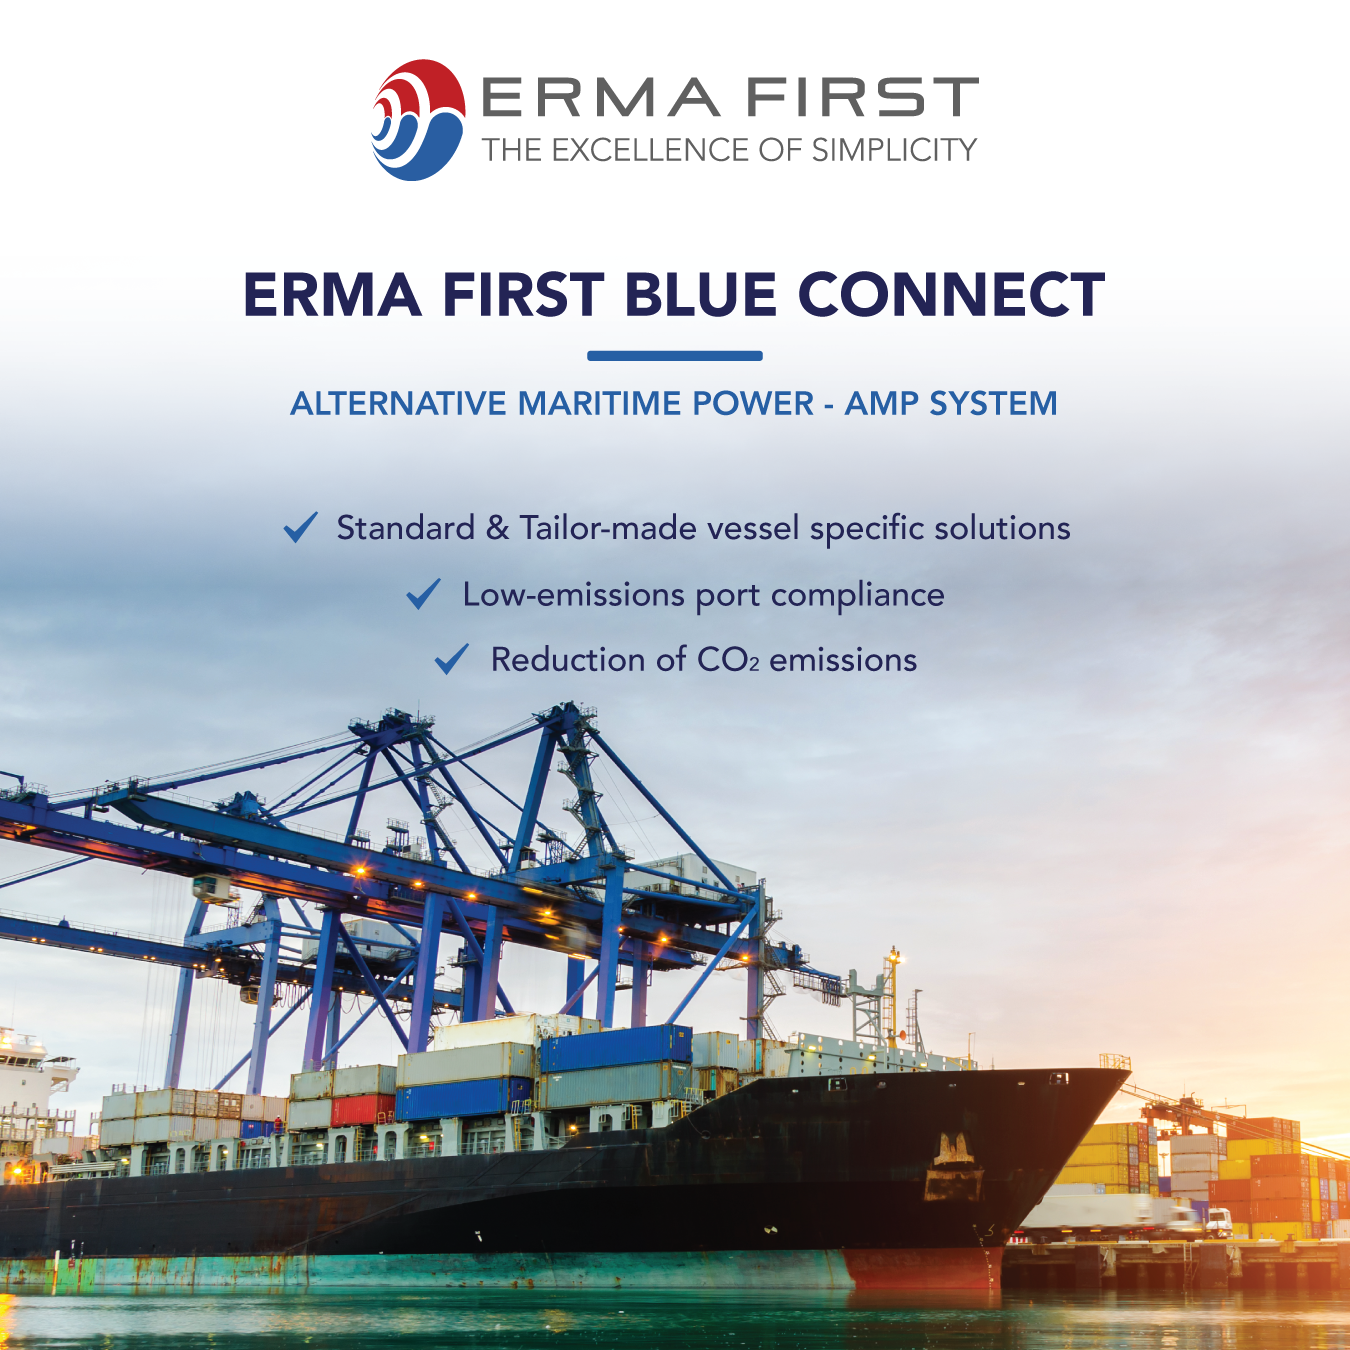 ERMA FIRST: Technology and the transition to a low carbon shipping sector